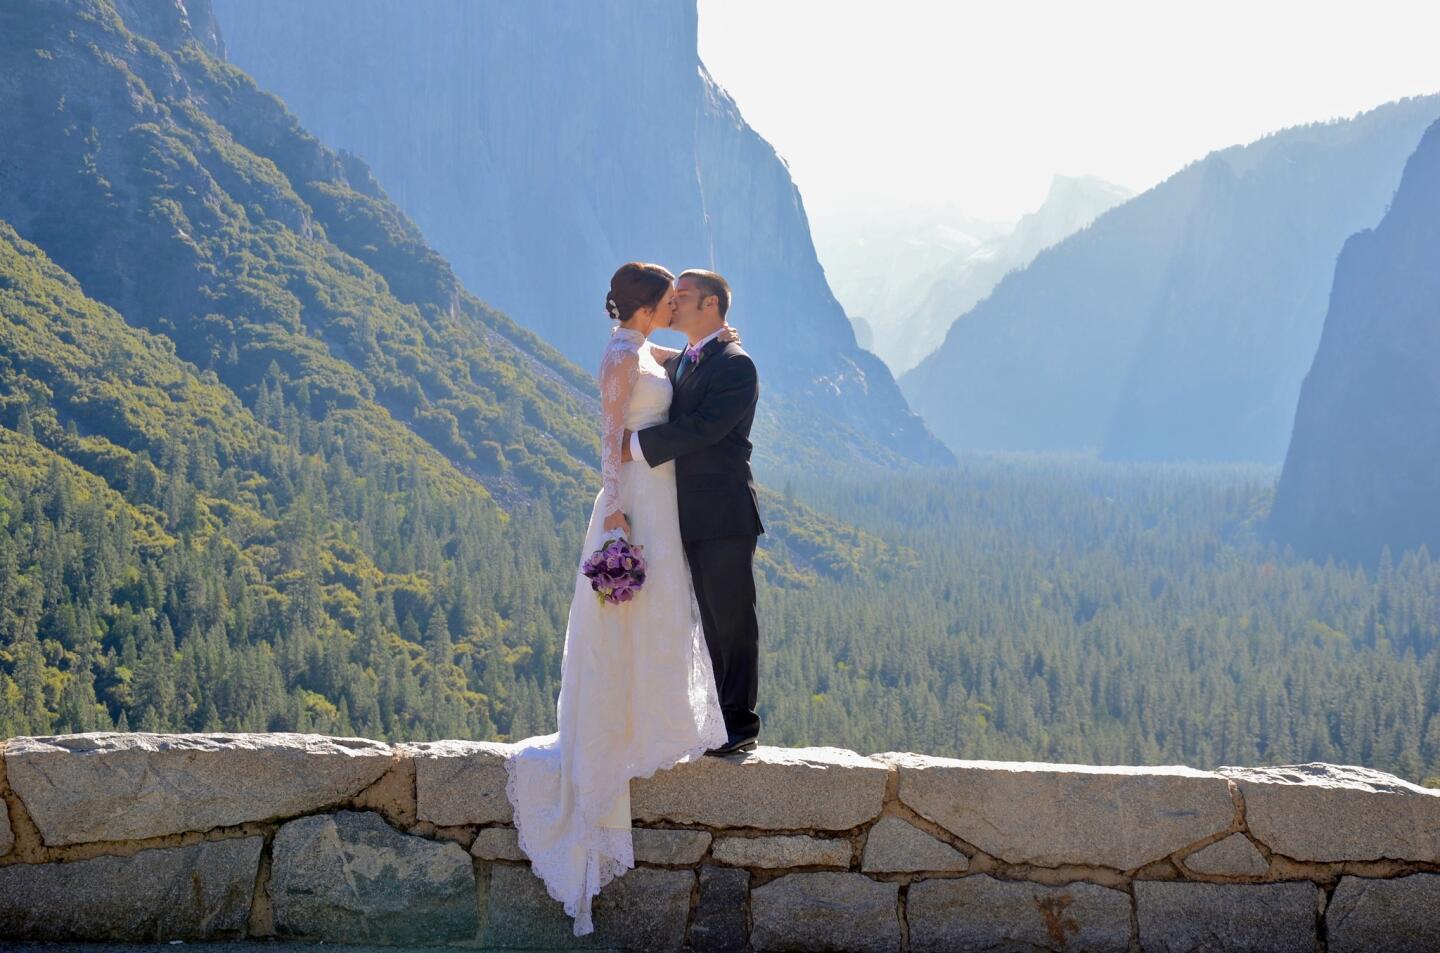 This couple, standing at Tunnel View in Yosemite Valley, hired a preacher and raced out to this popular viewpoint to say their vows first thing in the morning, before the first tour buses arrived. Photo taken in 2013.